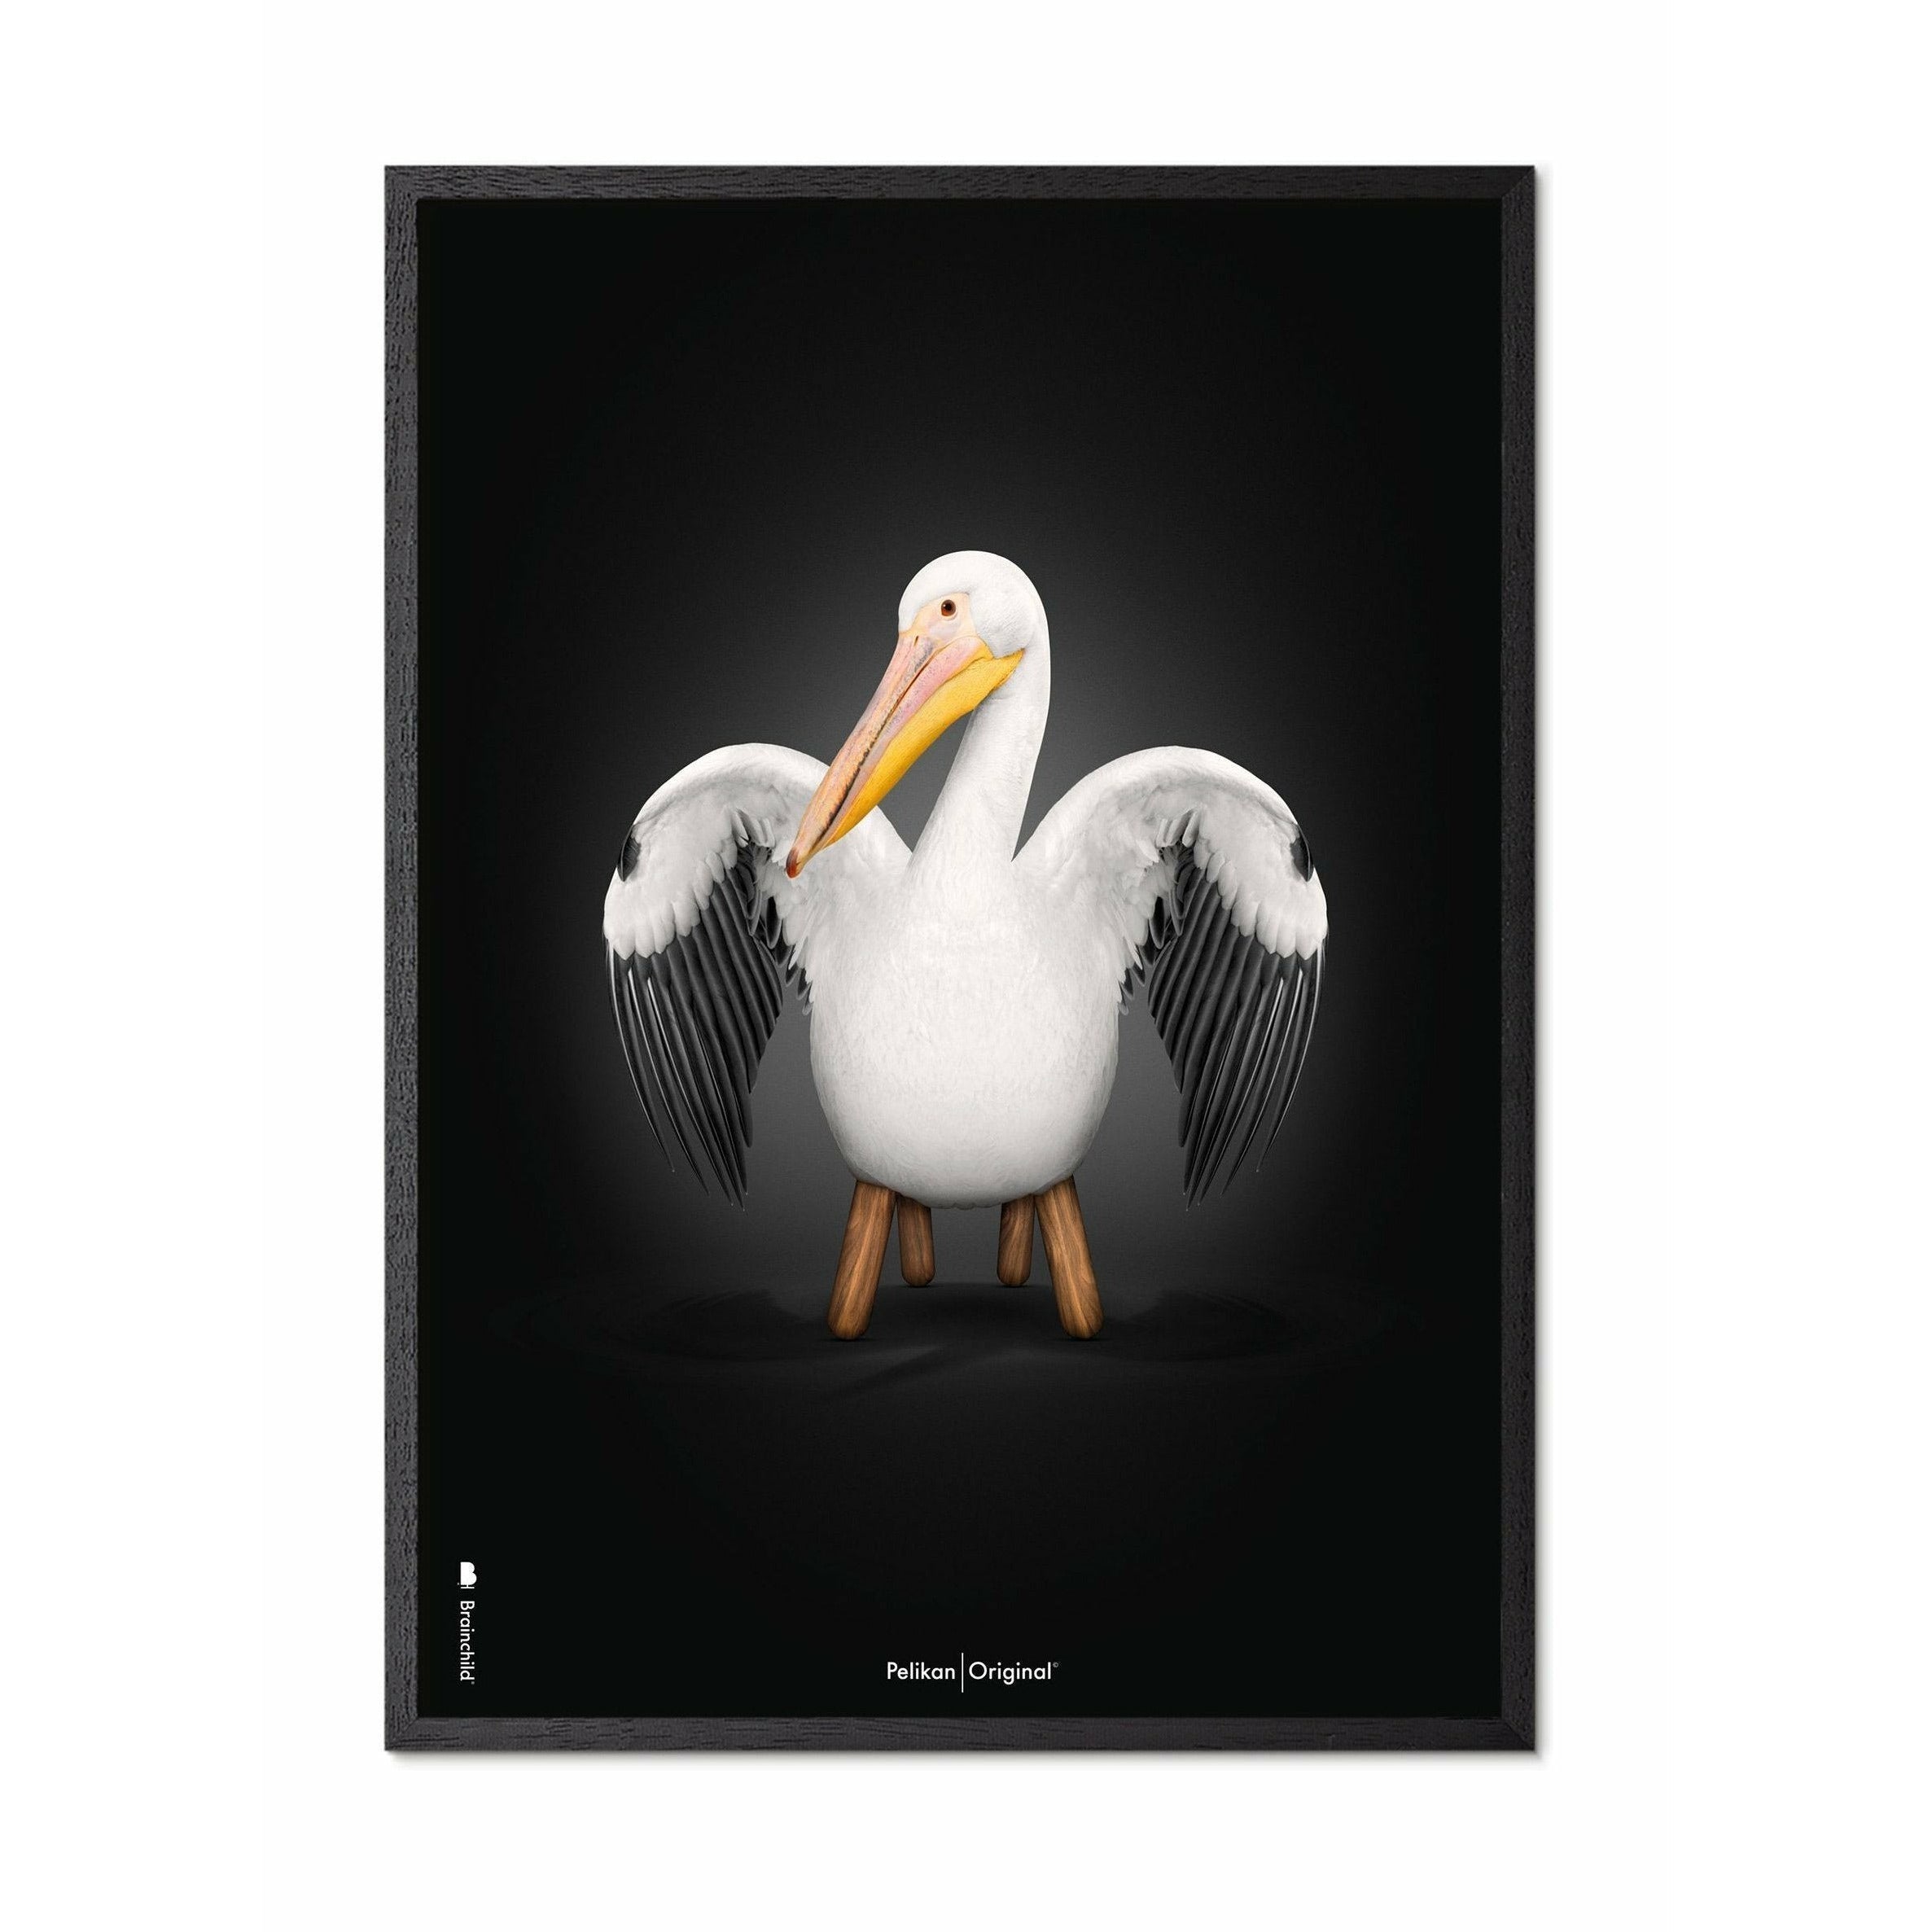 Brainchild Pelikan Classic Poster, Frame In Black Lacquered Wood 70x100 Cm, Black Background